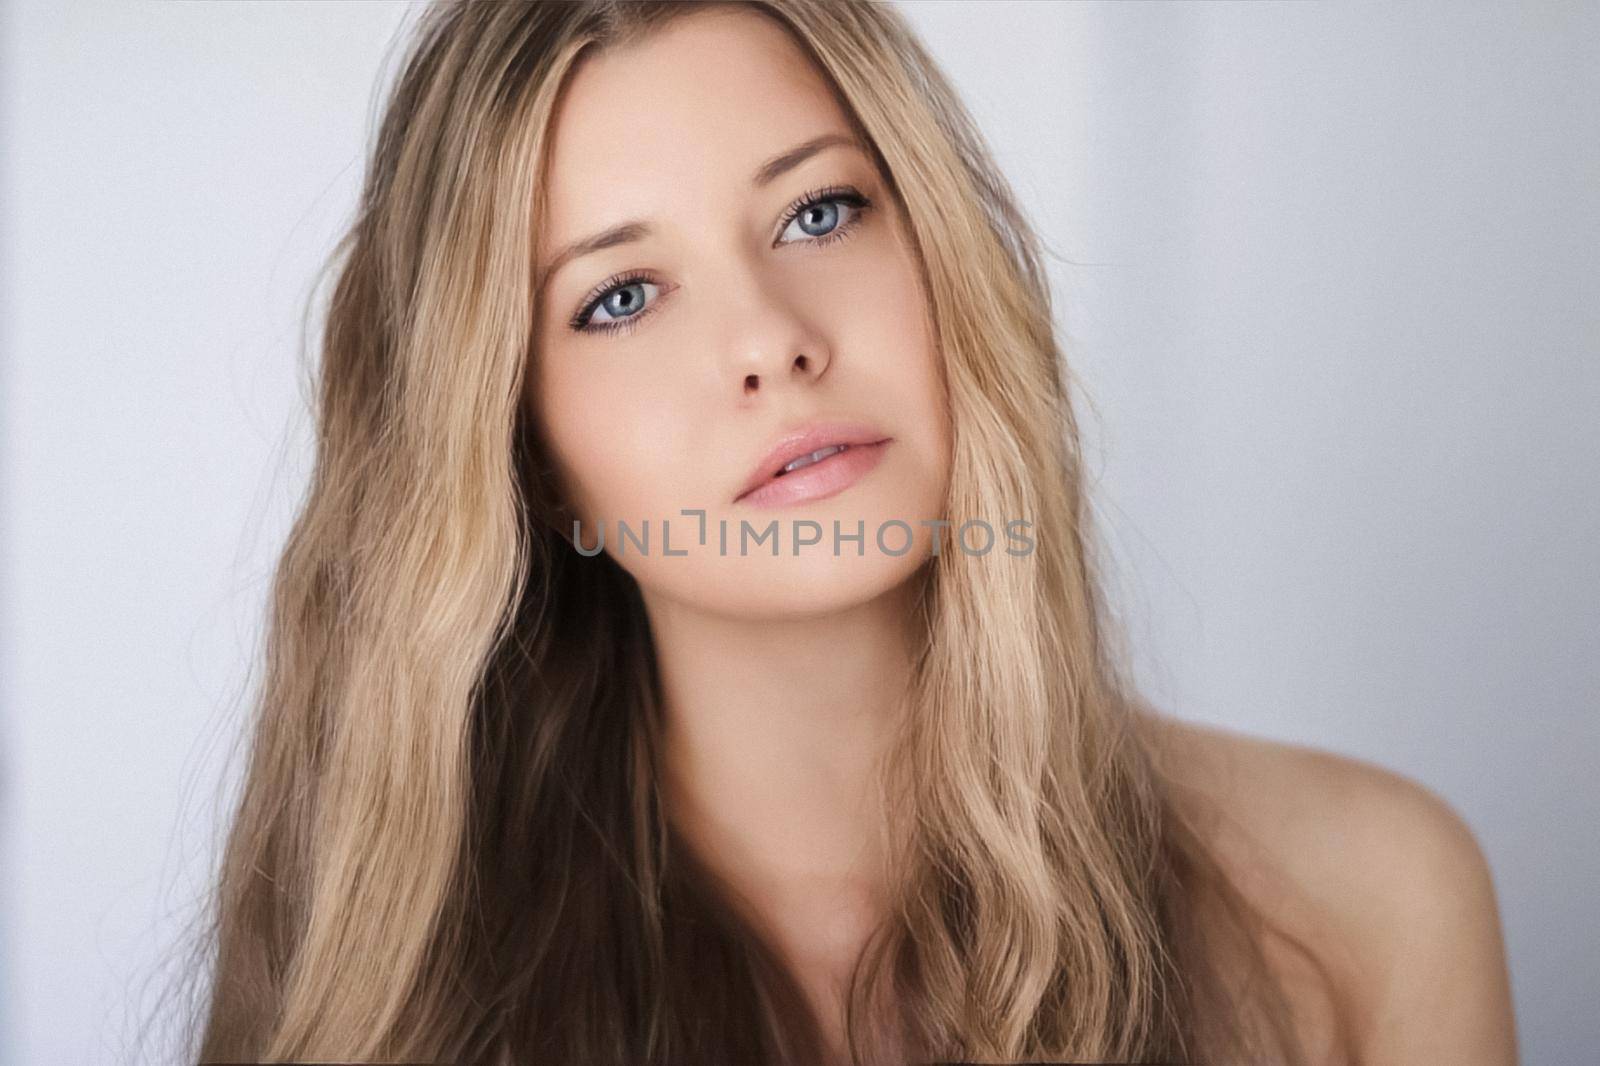 Beauty model look and face portrait. Beautiful woman with blonde hair, long hairstyle and natural makeup as classic closeup for cosmetic and wellness brand.